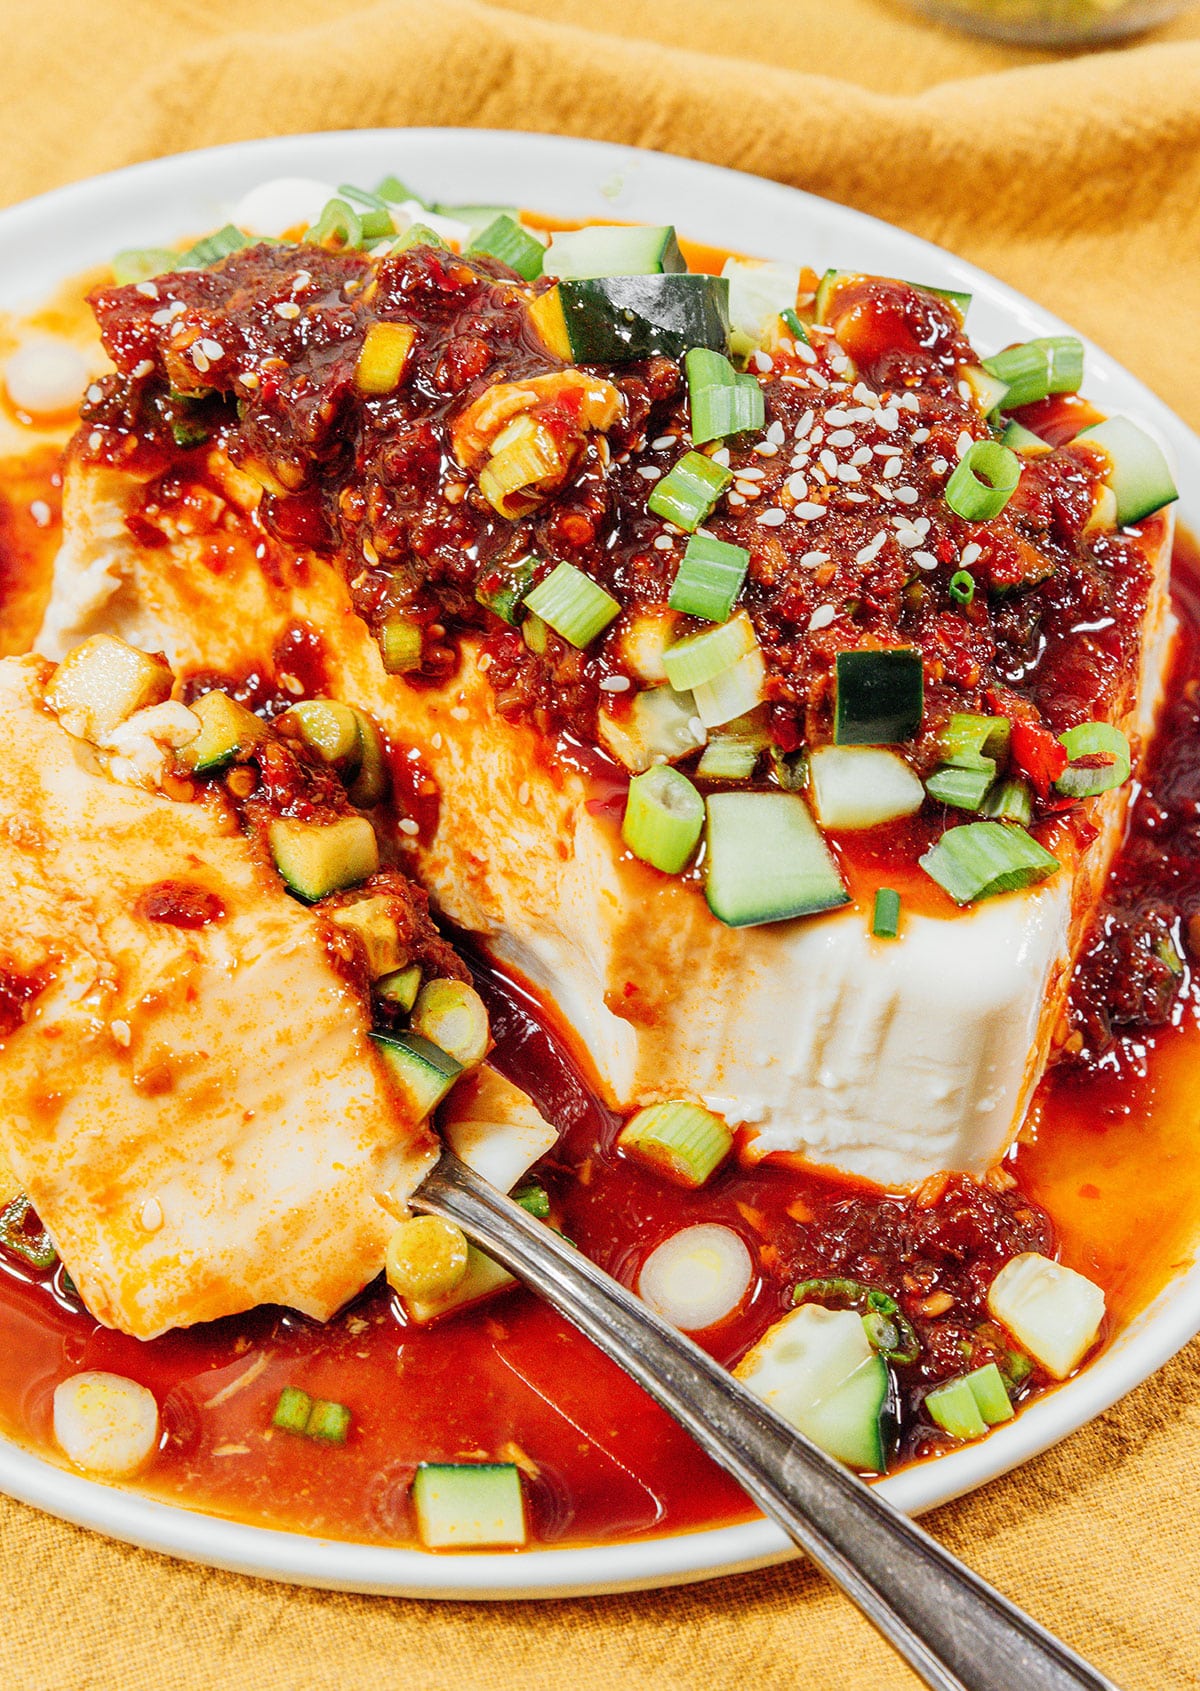 Silken tofu with spicy soy sauce and green onions on top.